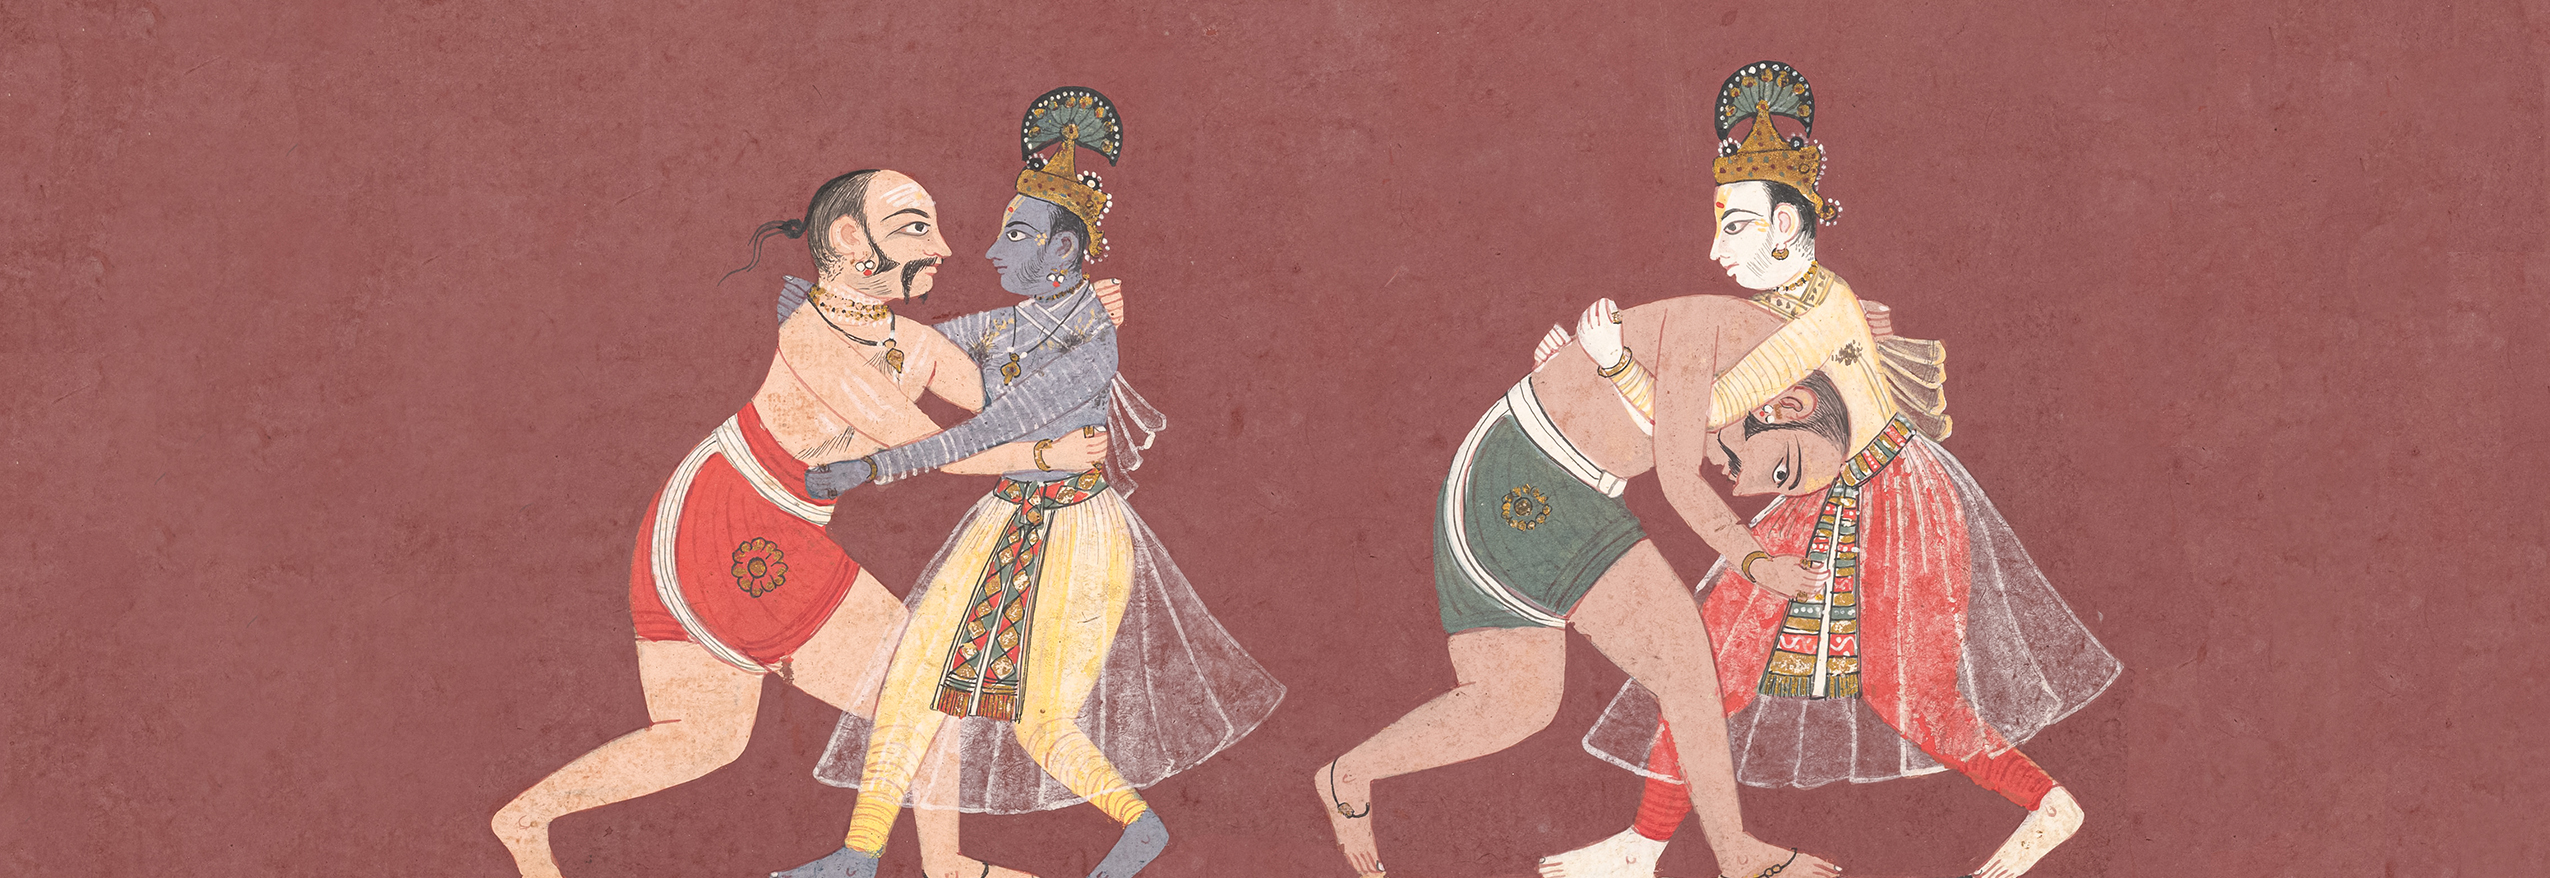 Customs of Combat: Martial Art Traditions of India